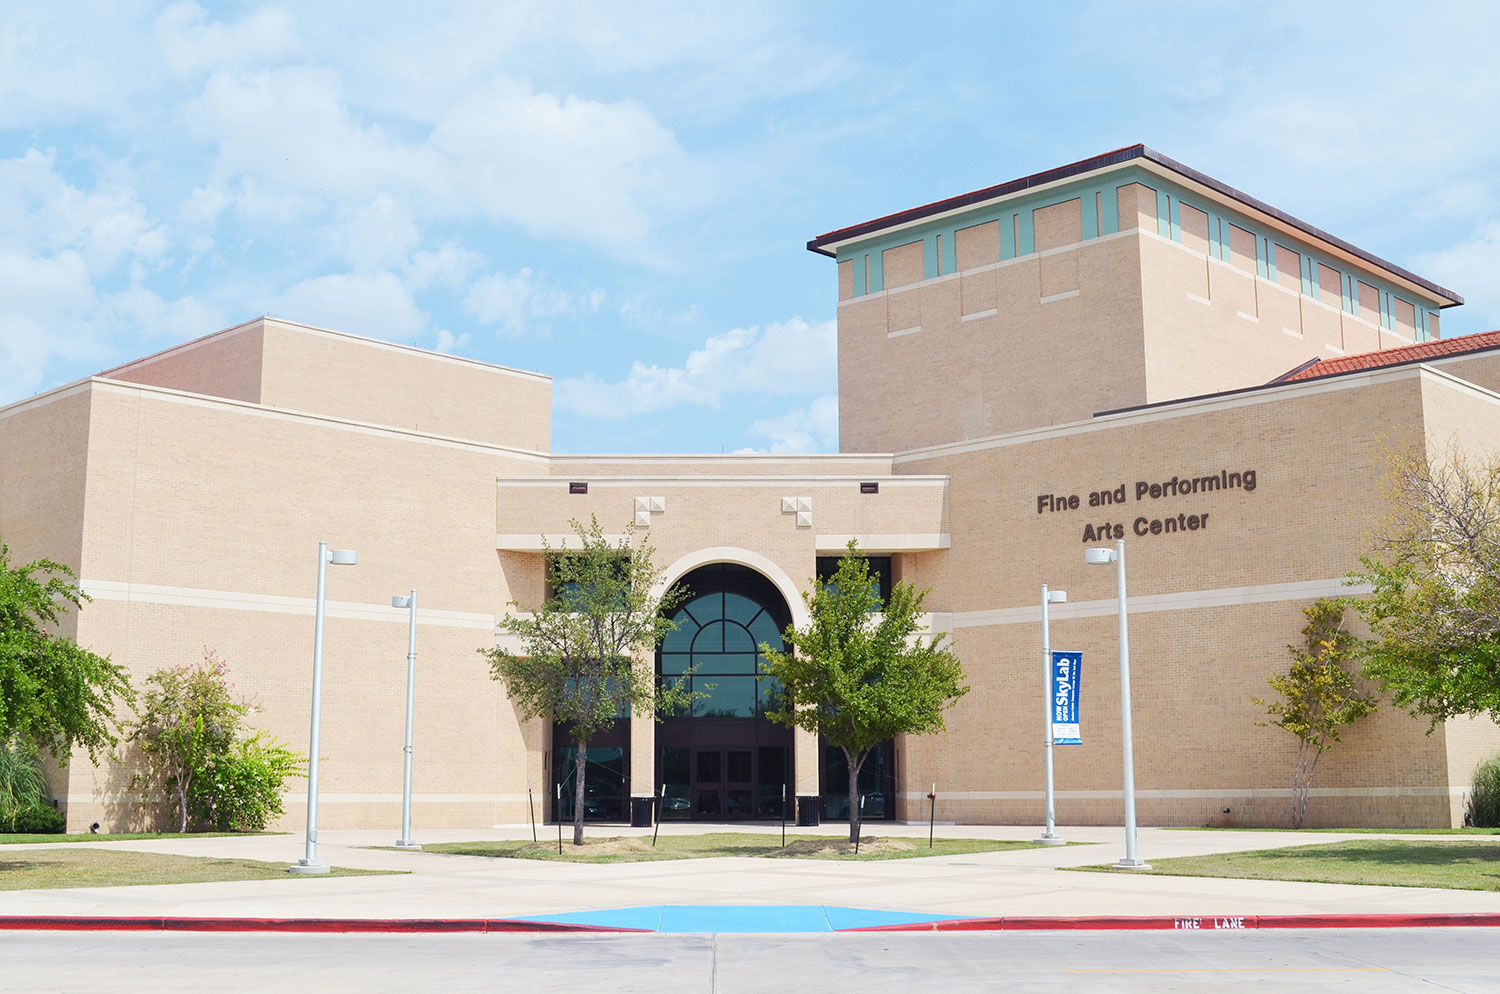 Center for the Fine and Performing Arts